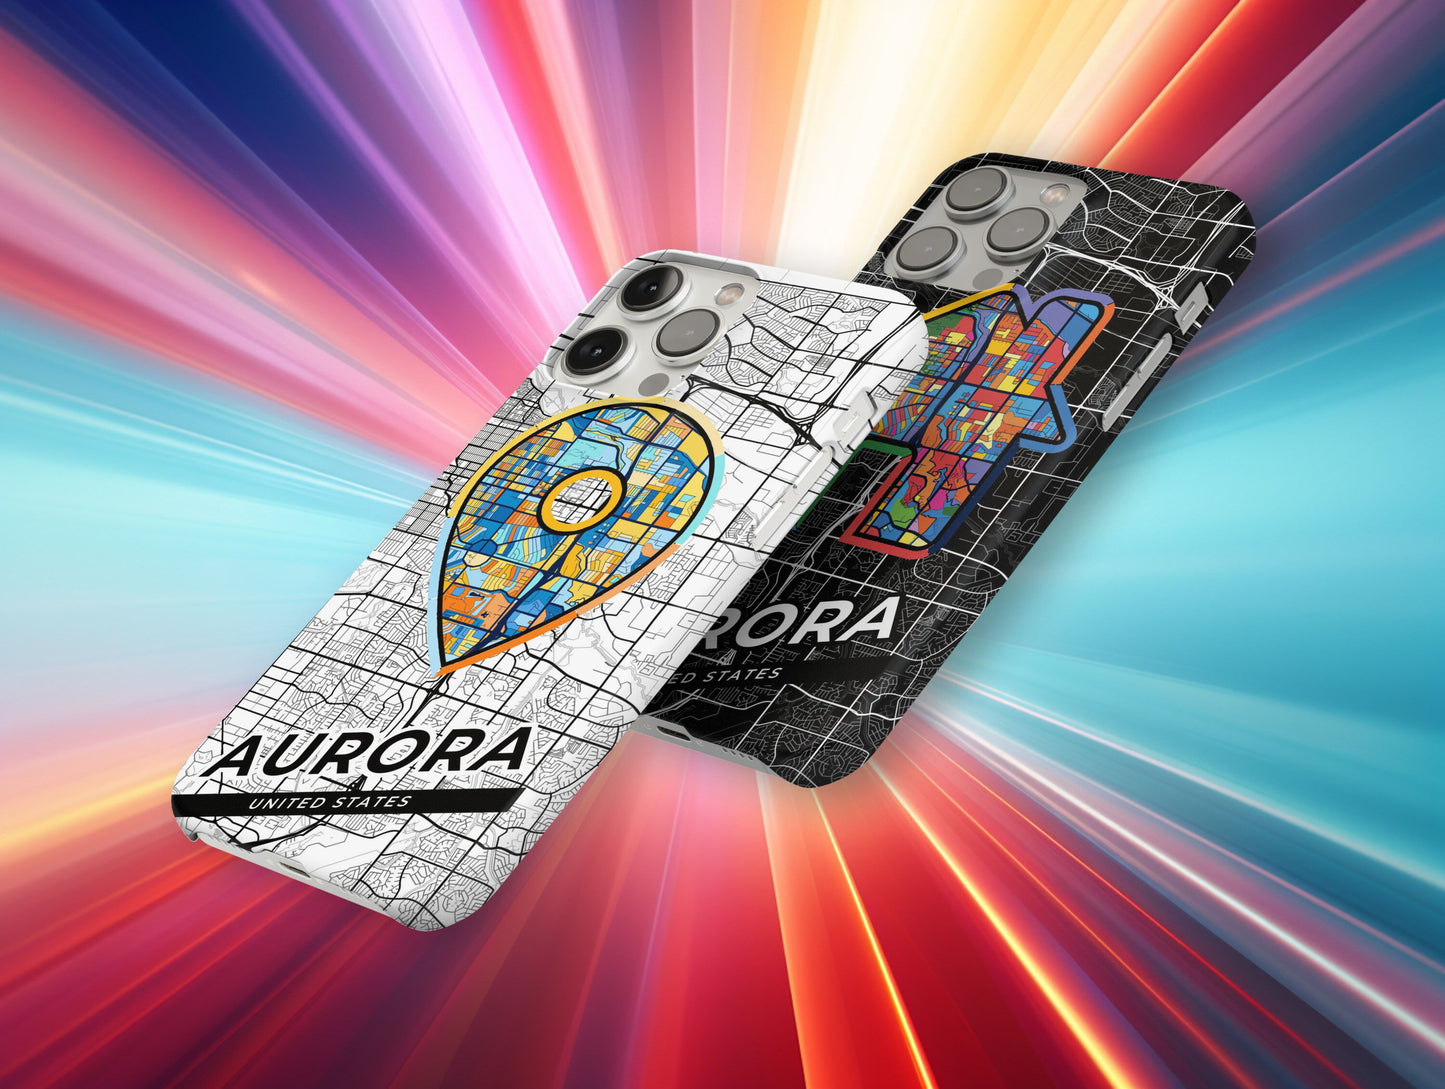 Aurora Colorado slim phone case with colorful icon. Birthday, wedding or housewarming gift. Couple match cases.